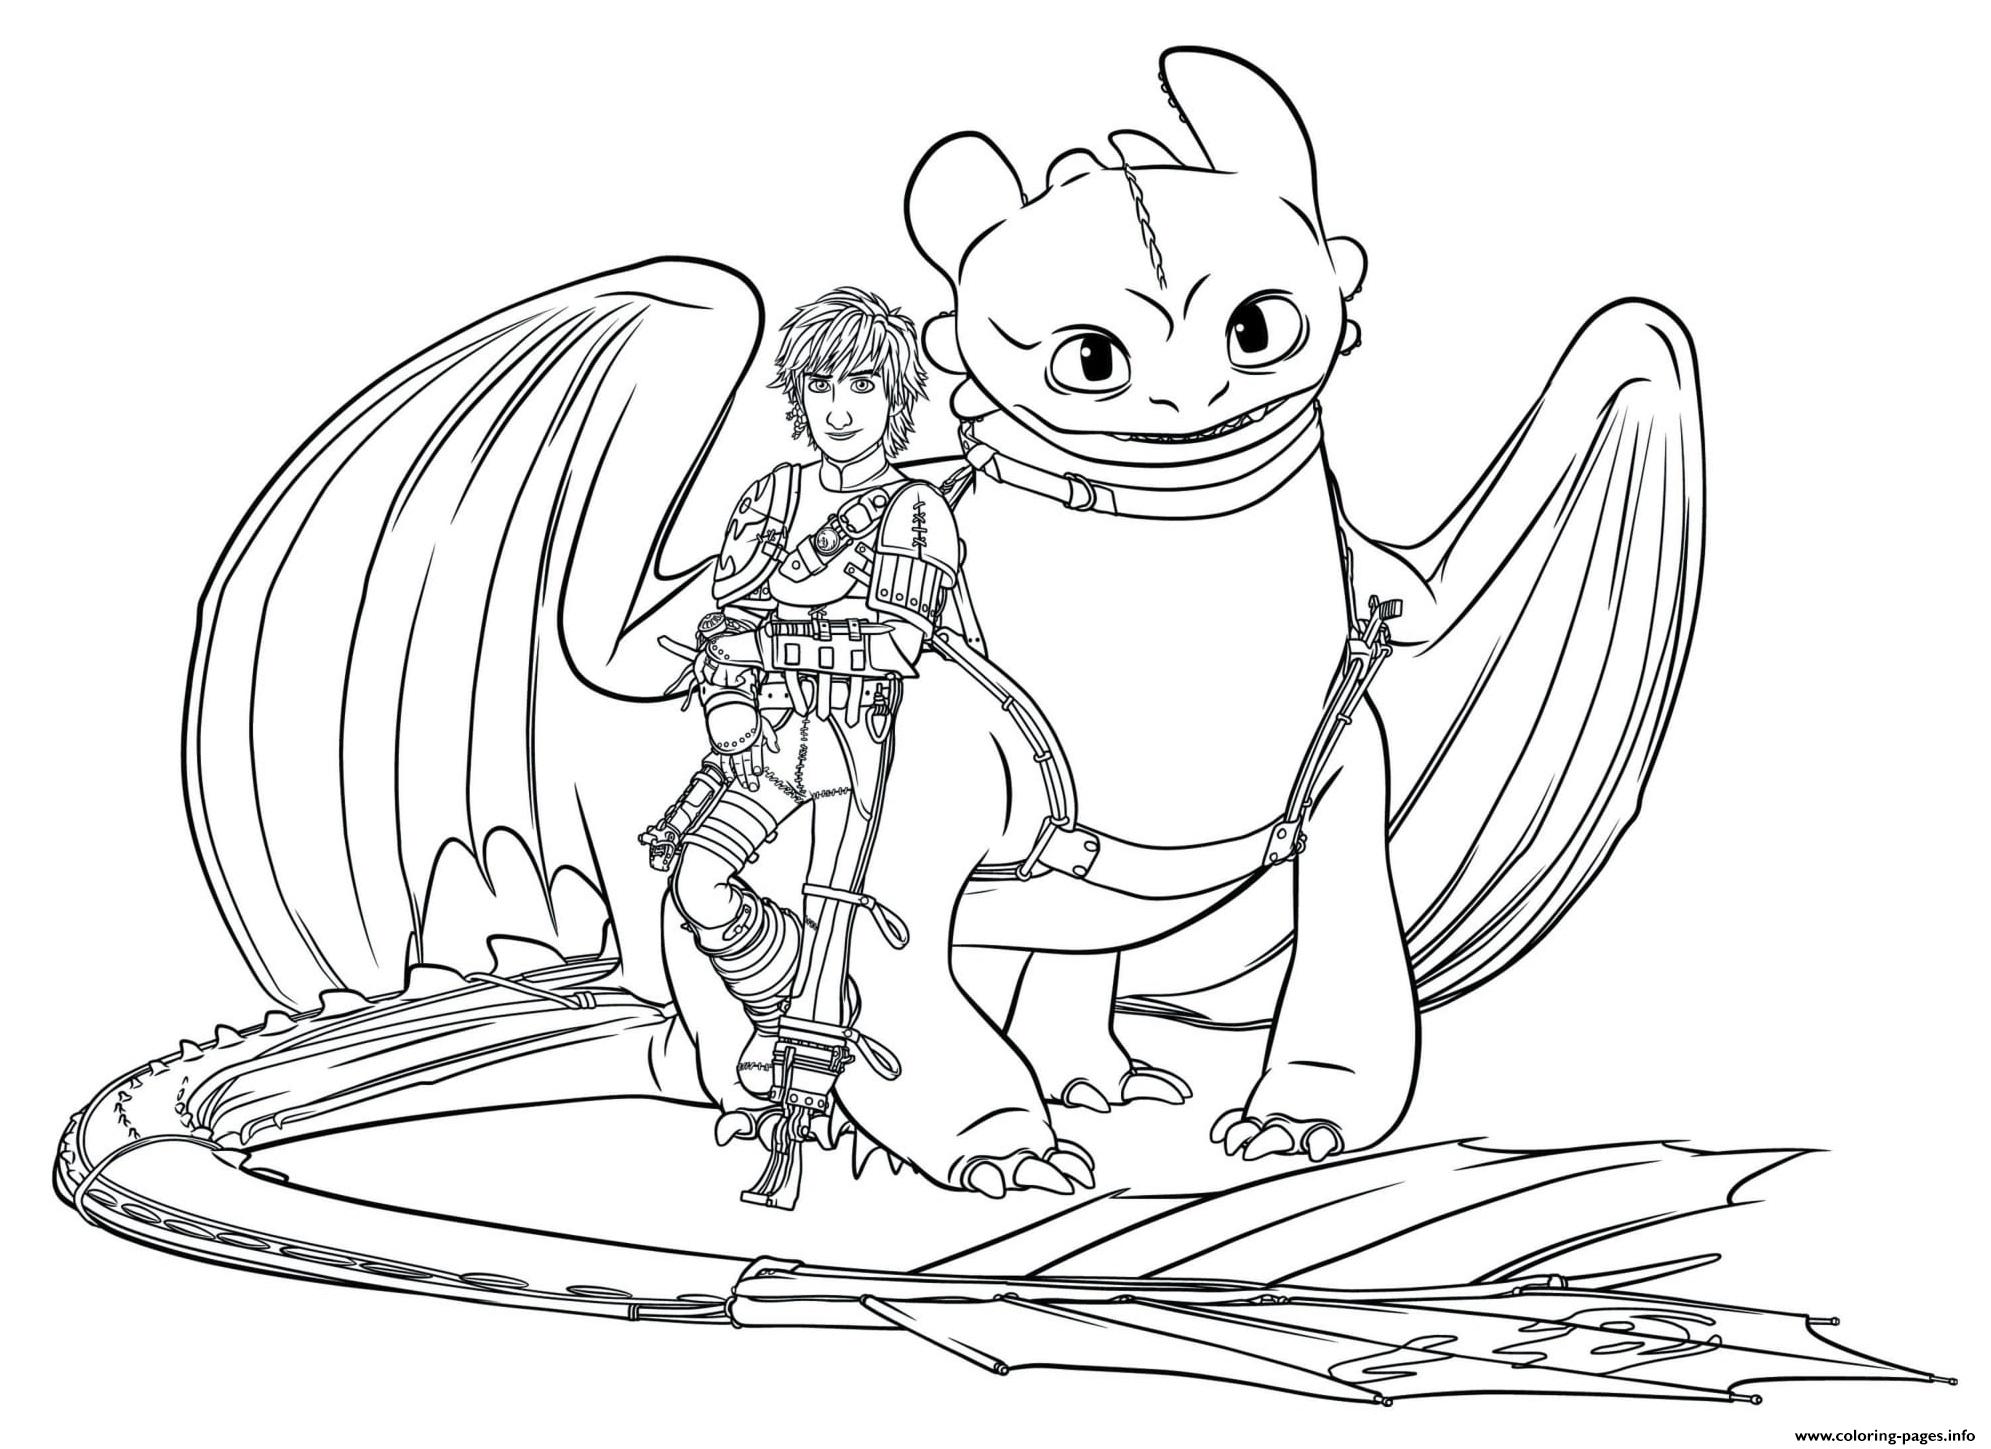 Download Hiccup Coloring Pages - Coloring Home